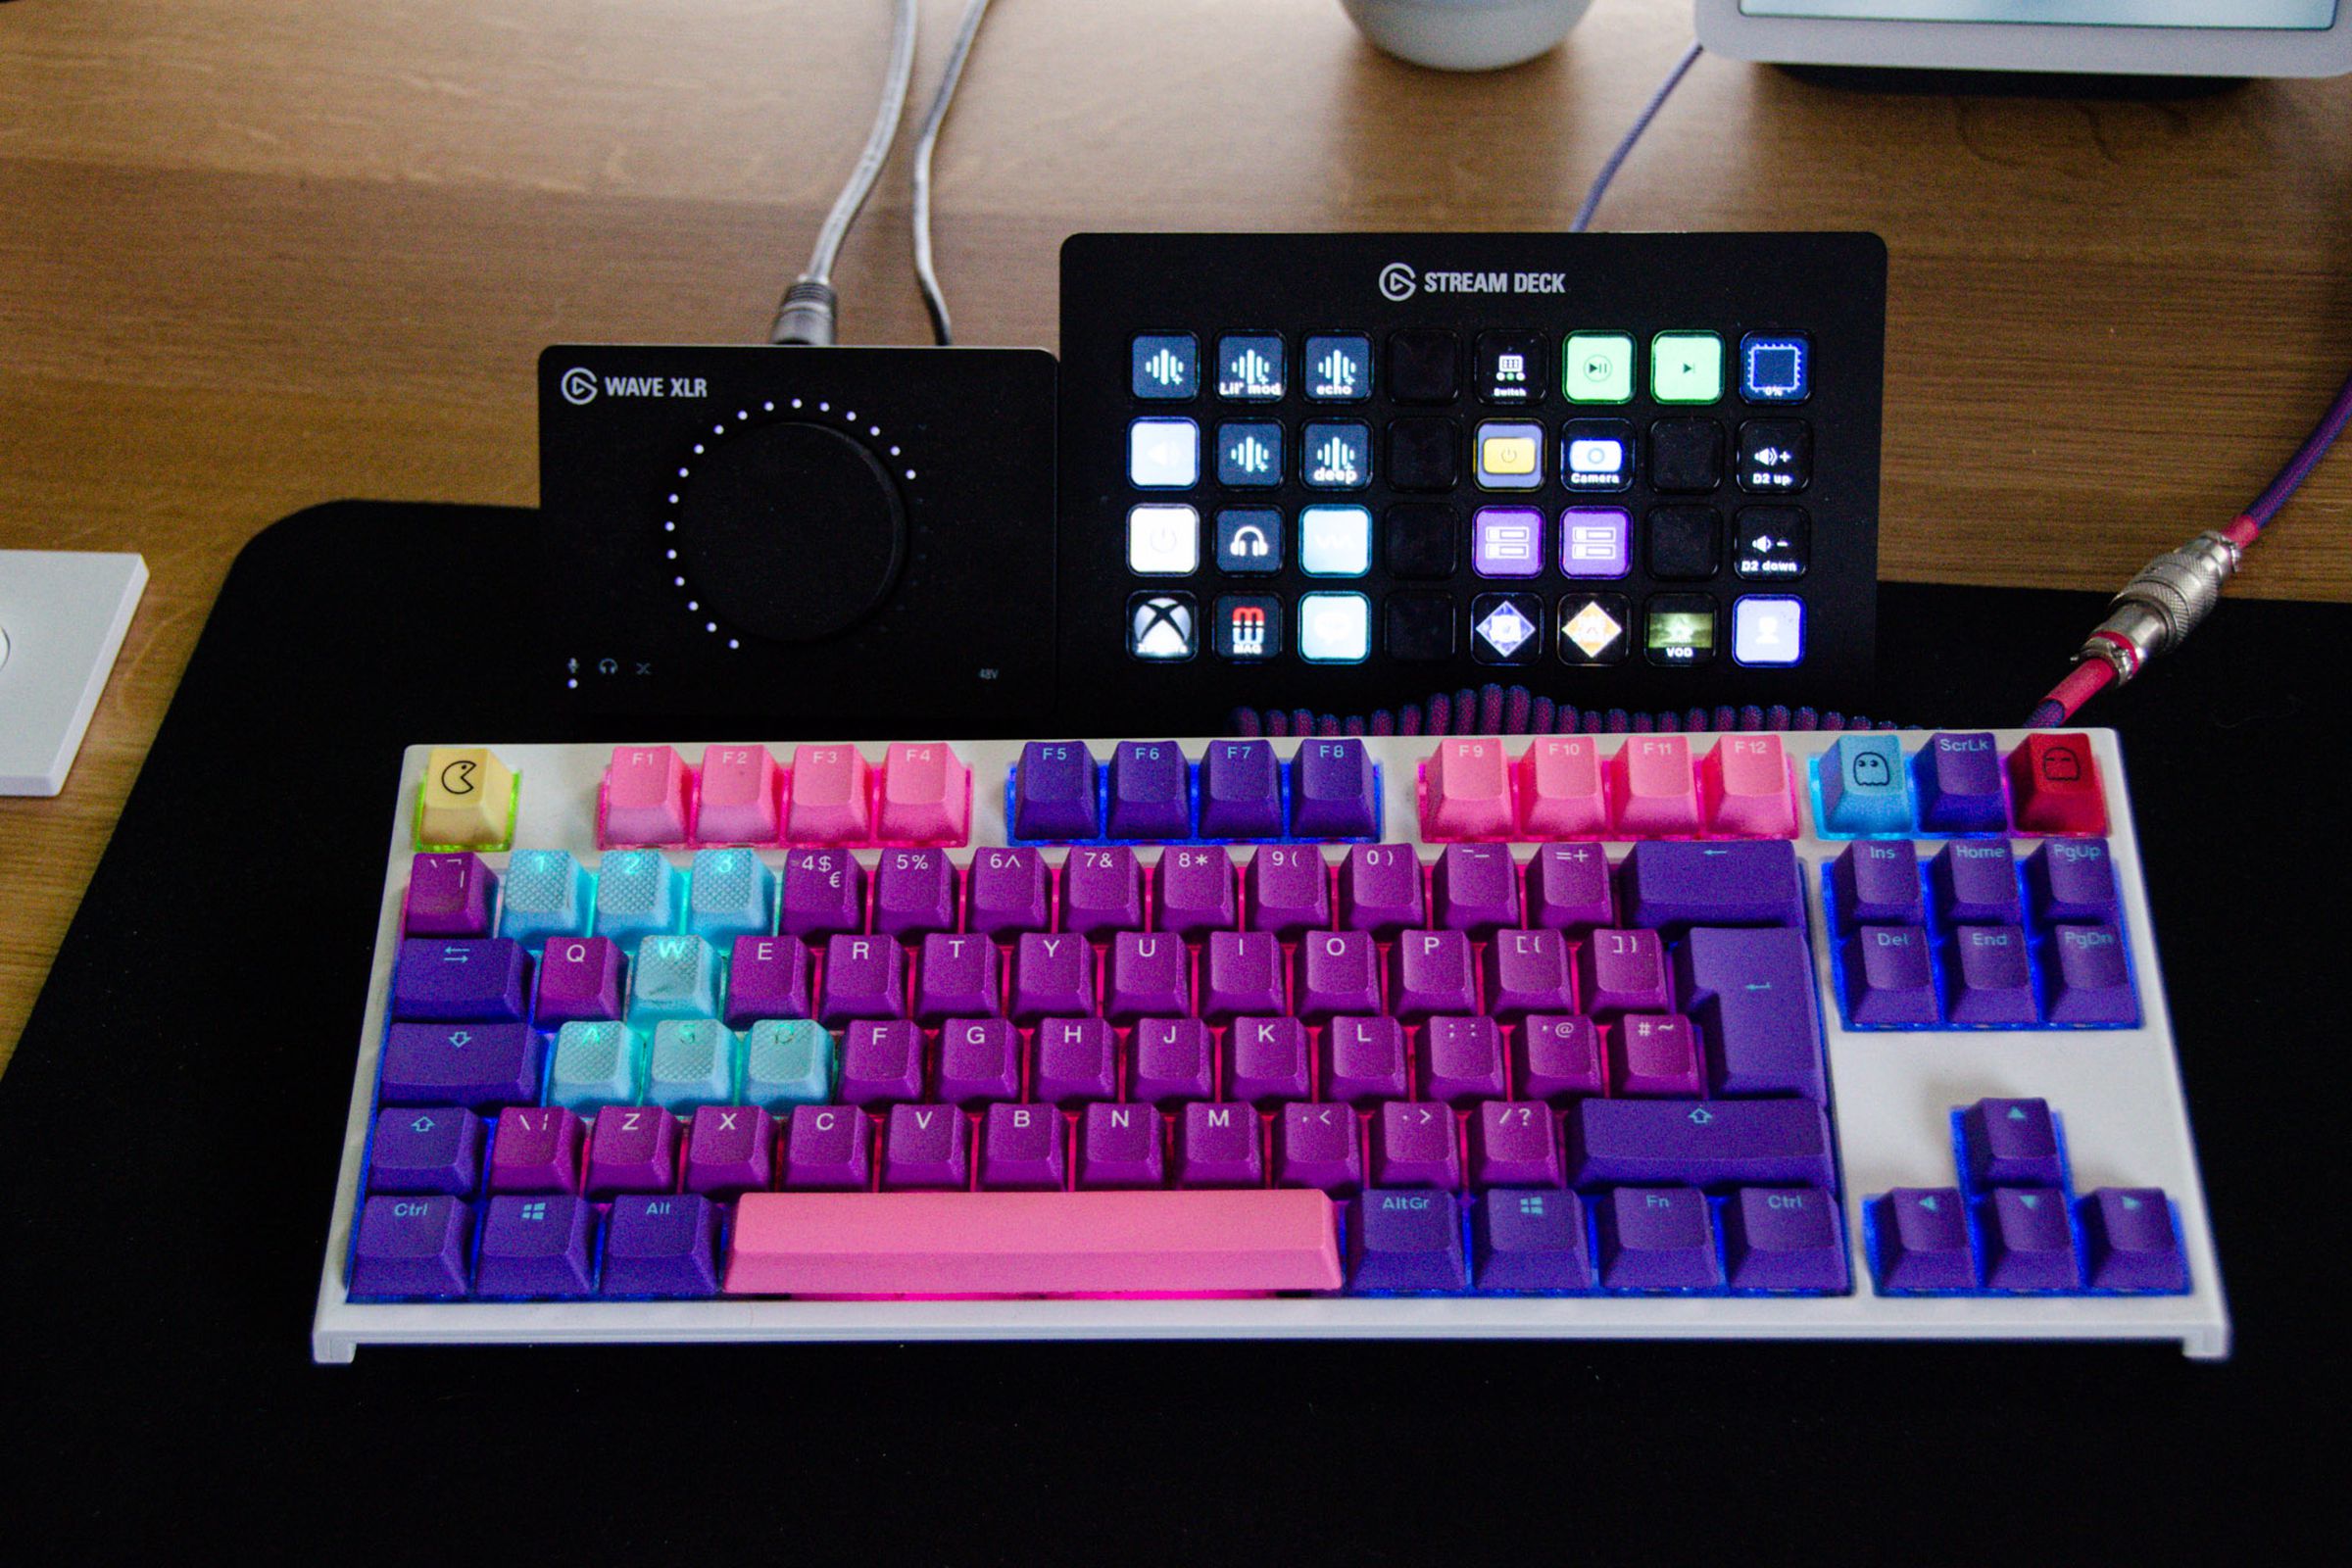 Behind the colorful gaming keyboard is a volume switch and Stream Deck button console.